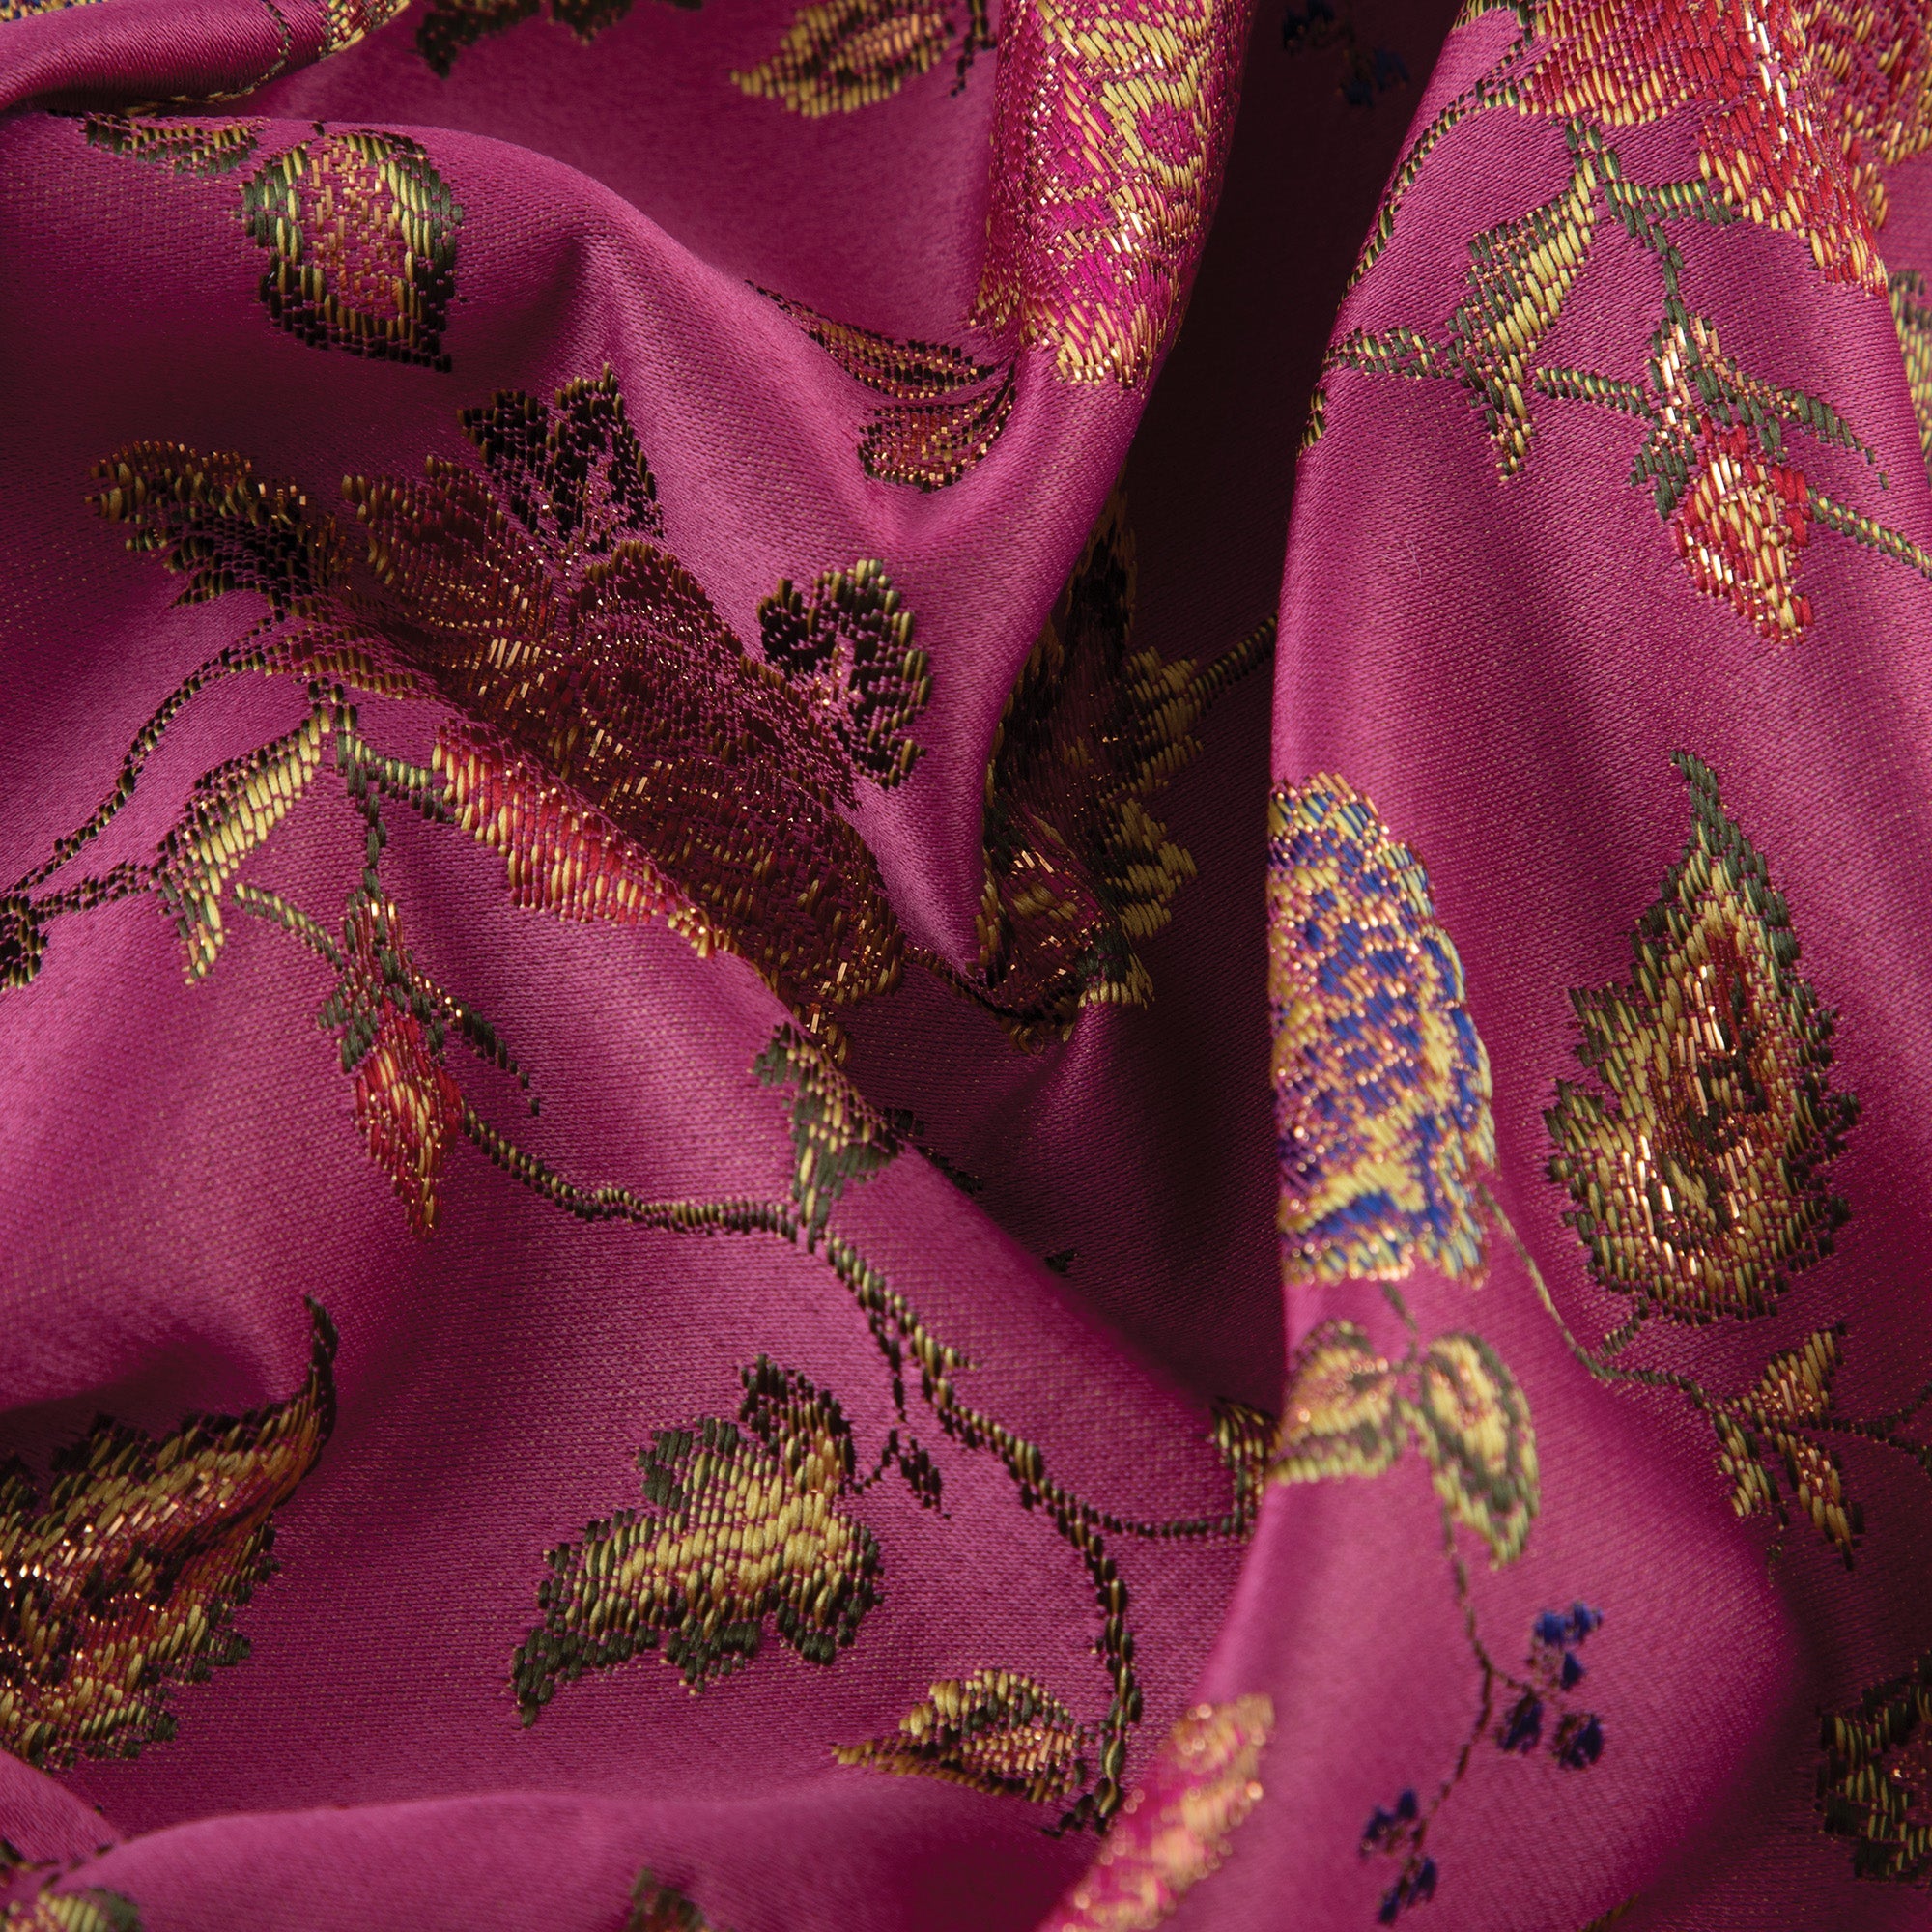 4 Seasons French Brocade Fabric, Floral, Light Pink